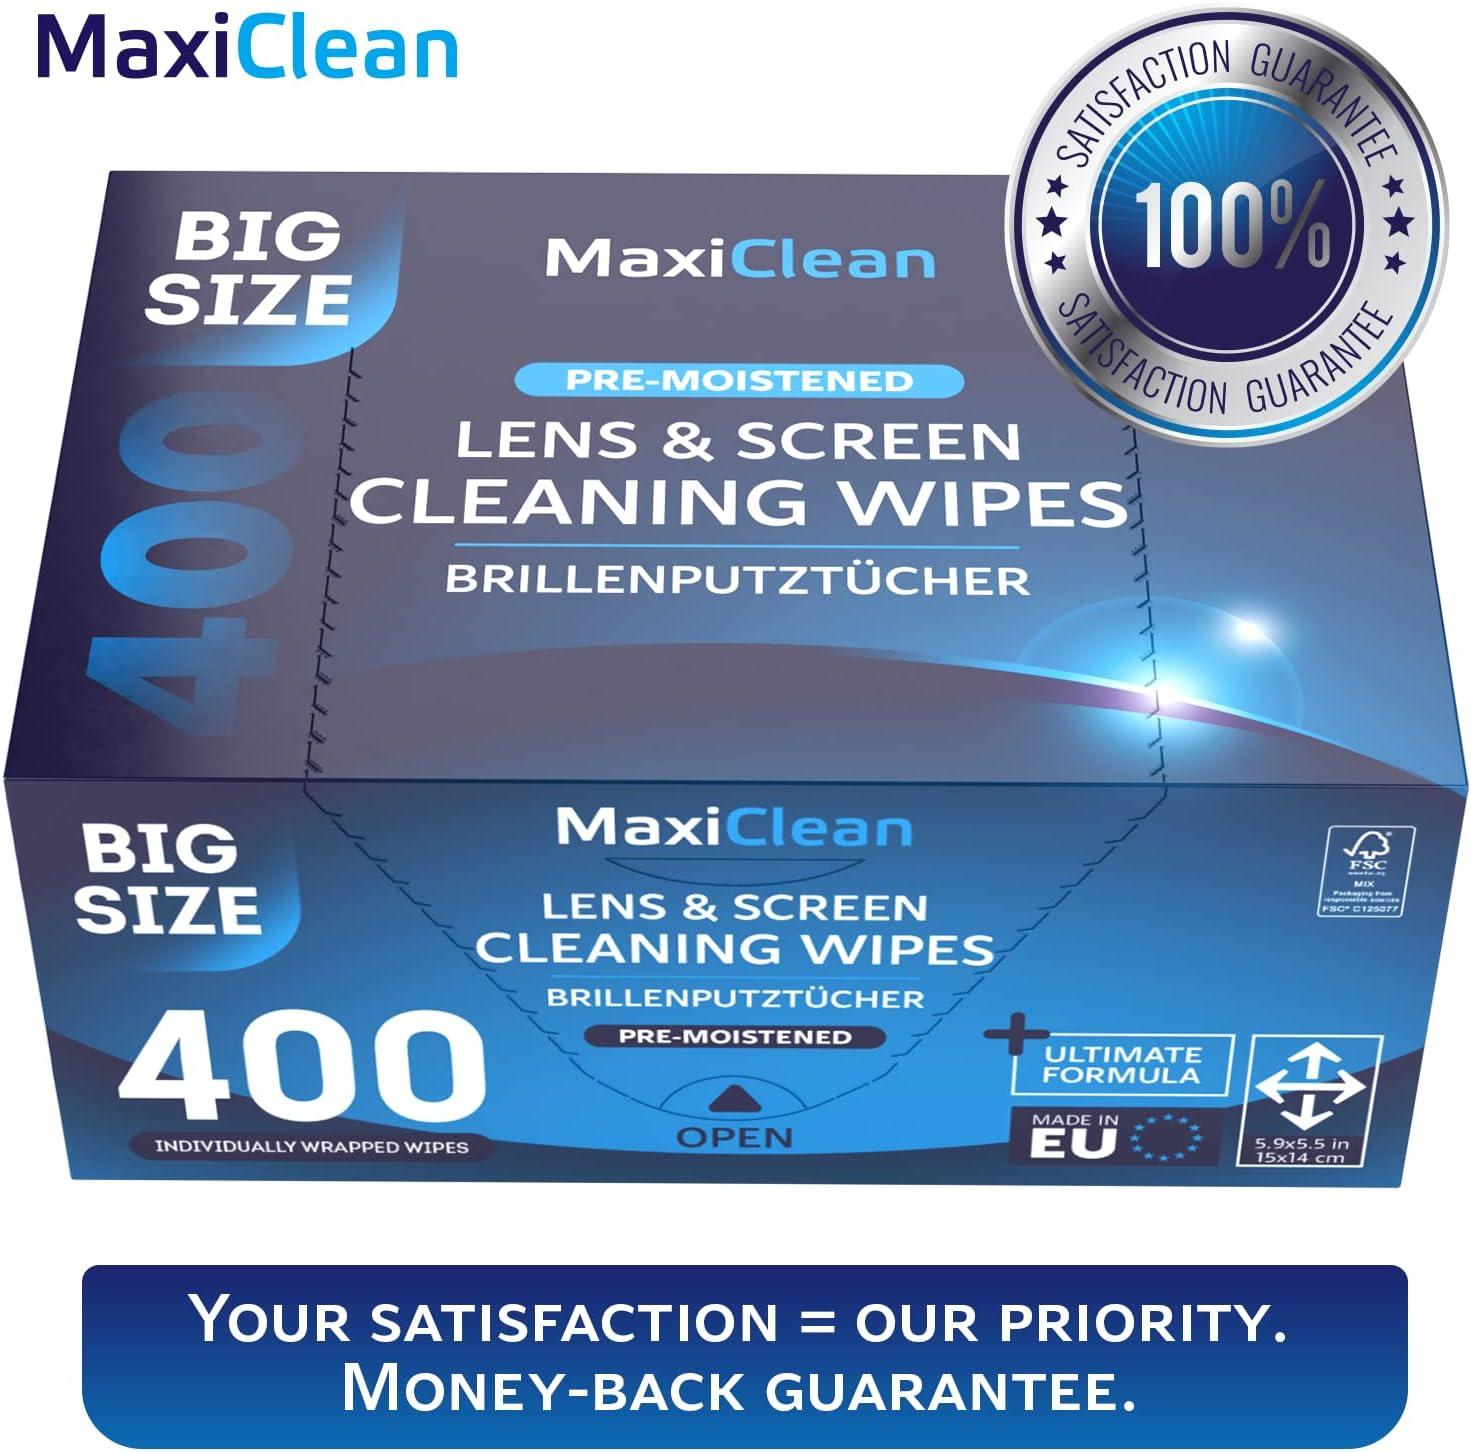 Glasses Wipes Lens Cleaner - Lens Wipes for Eyeglasses - 400 Pre-moistened  Individually Wrapped Wipes for Eye Glasses, Electronics, Phone, Computer,  Laptop Screen - Camera Lens Cleaner - Made in EU 400 Count (Pack of 1)